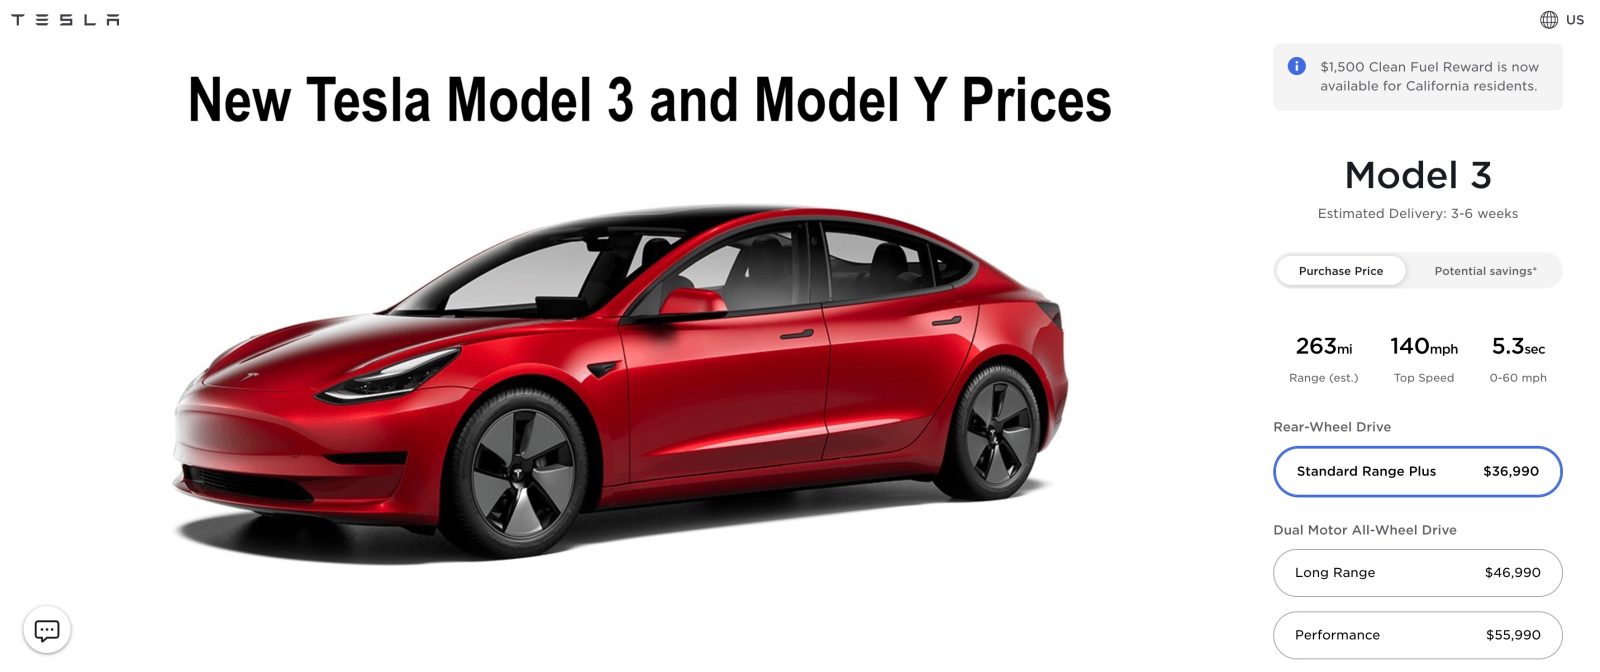 Tesla reduces Model 3 and Model Y prices, now starts under $37,000